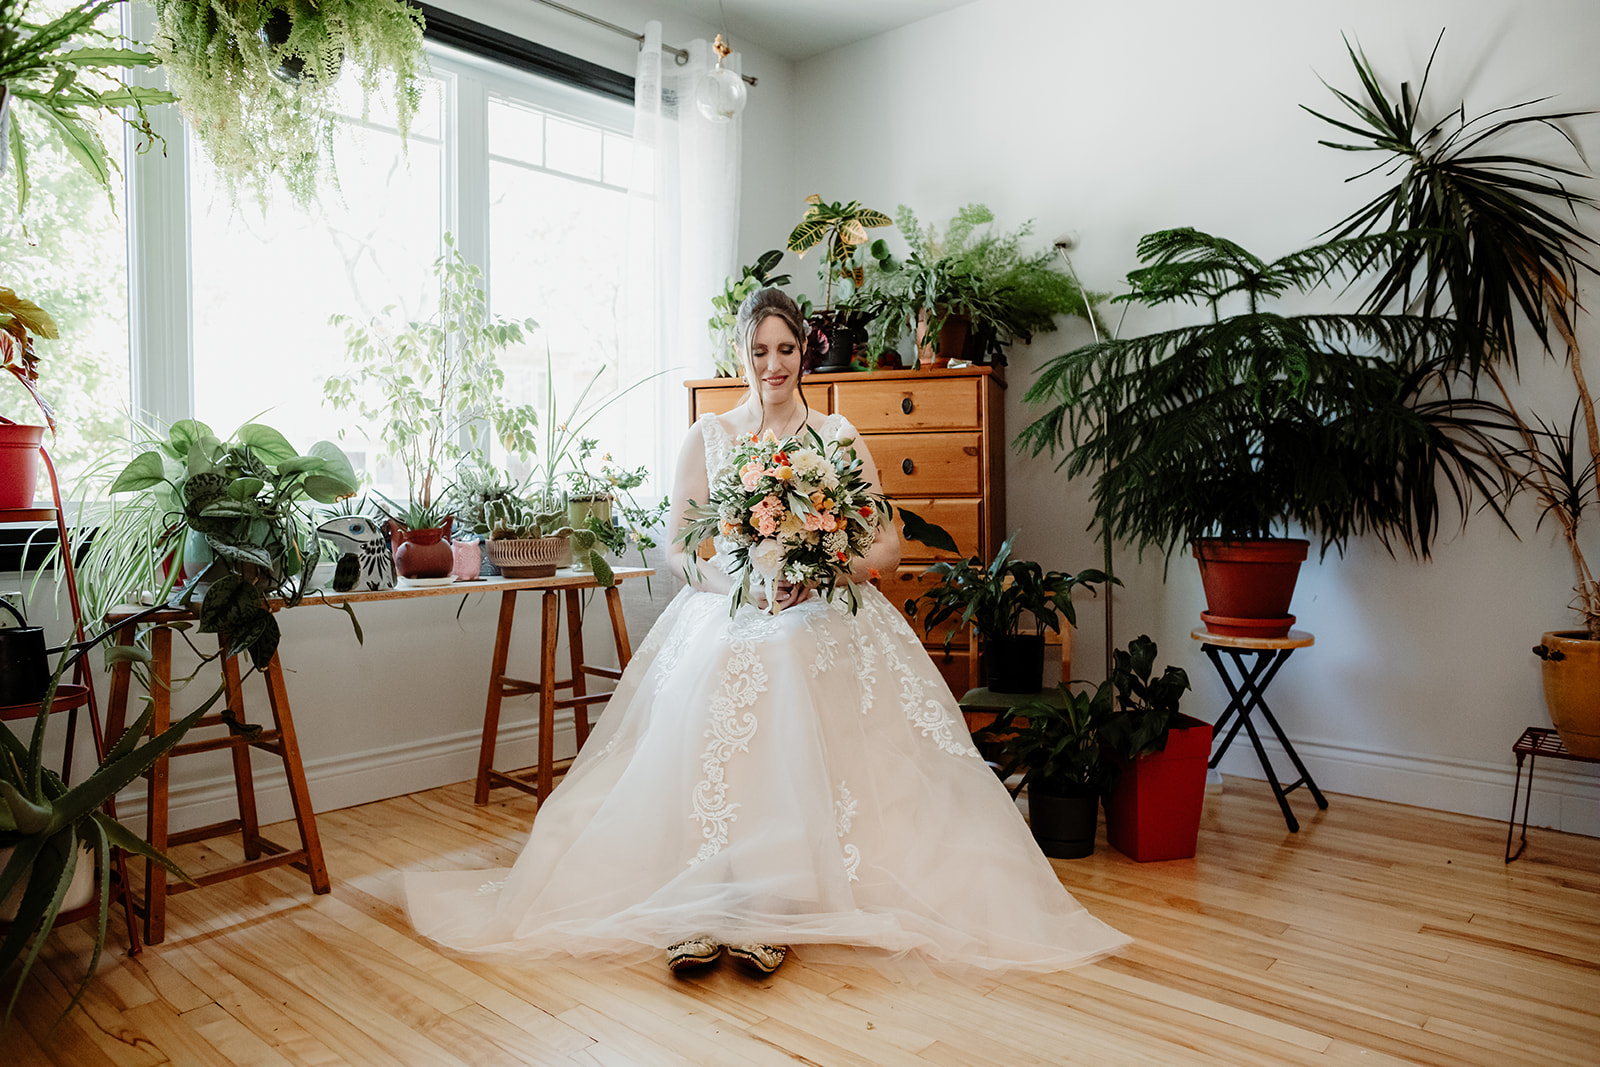 Bride getting ready at home surrounded by family and plants